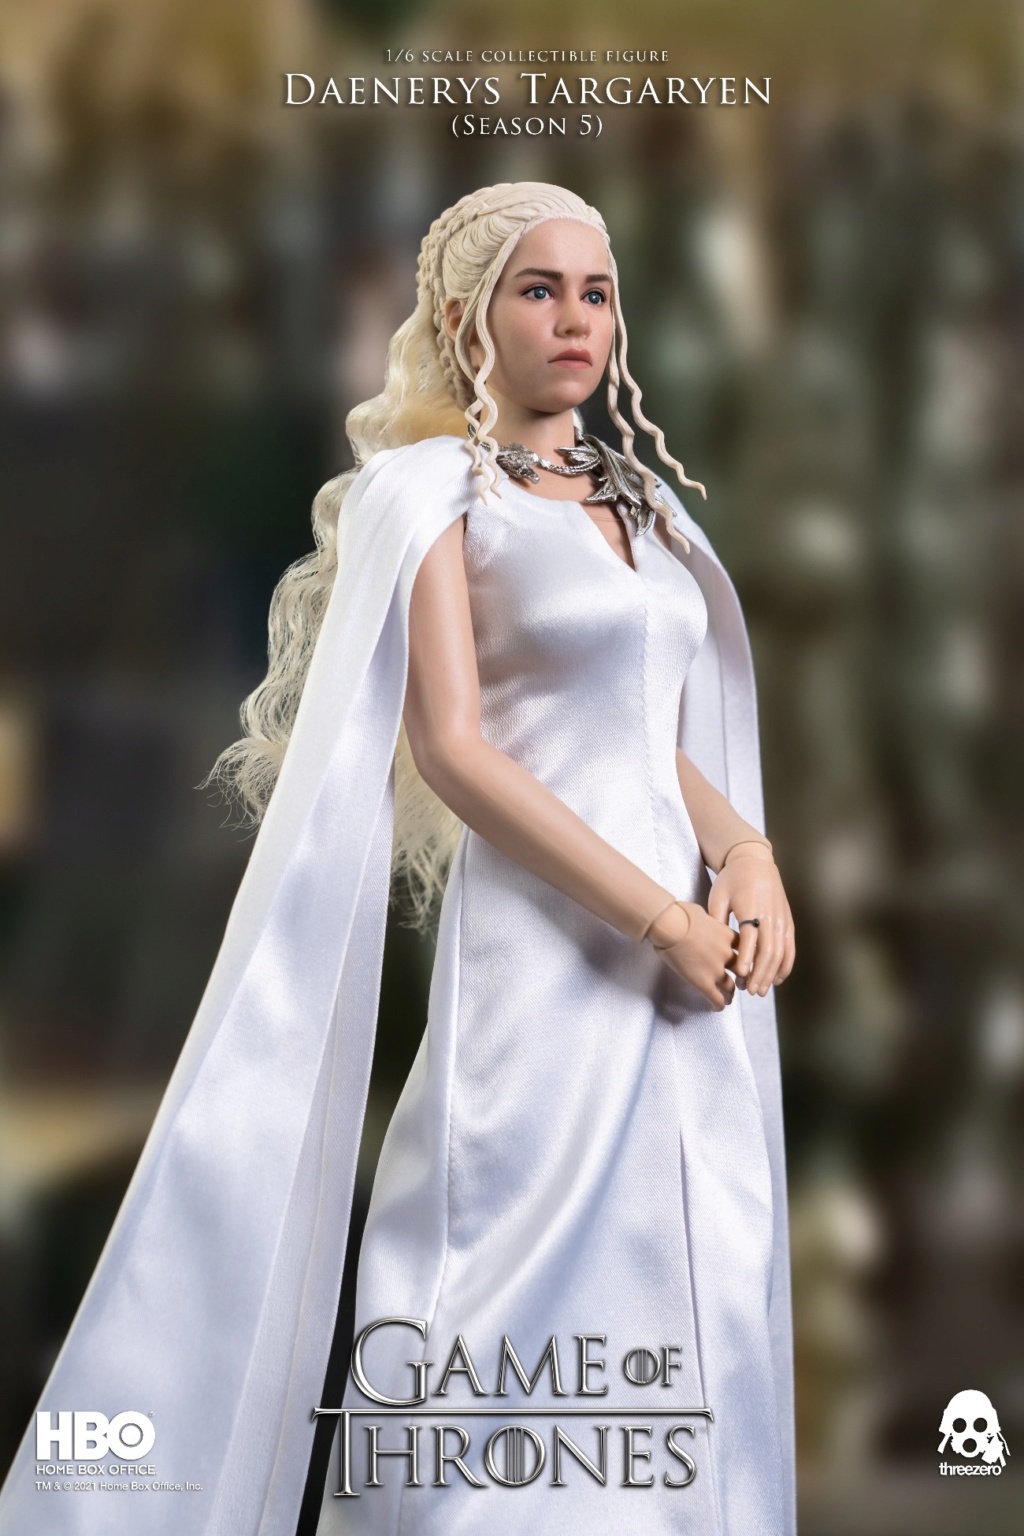 GameofThrones - NEW PRODUCT: ThreeZero: 1/6 "A Song of Ice and Fire: Game of Thrones" 10th Anniversary Special Edition-Daenerys Targaryen 20134810